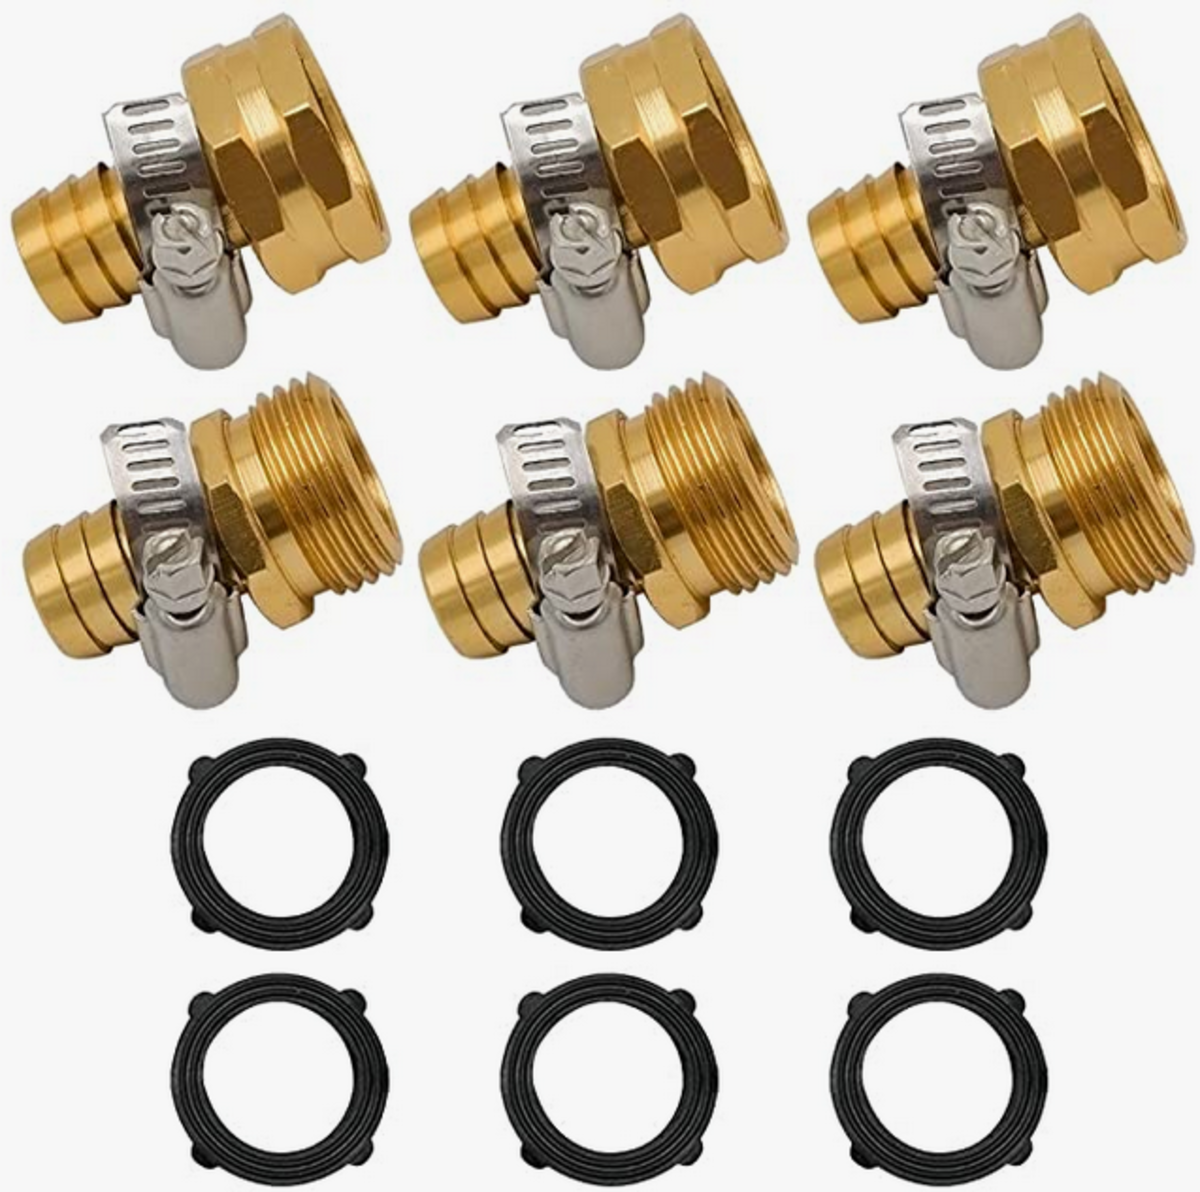 Threaded hose connectors available from Amazon.